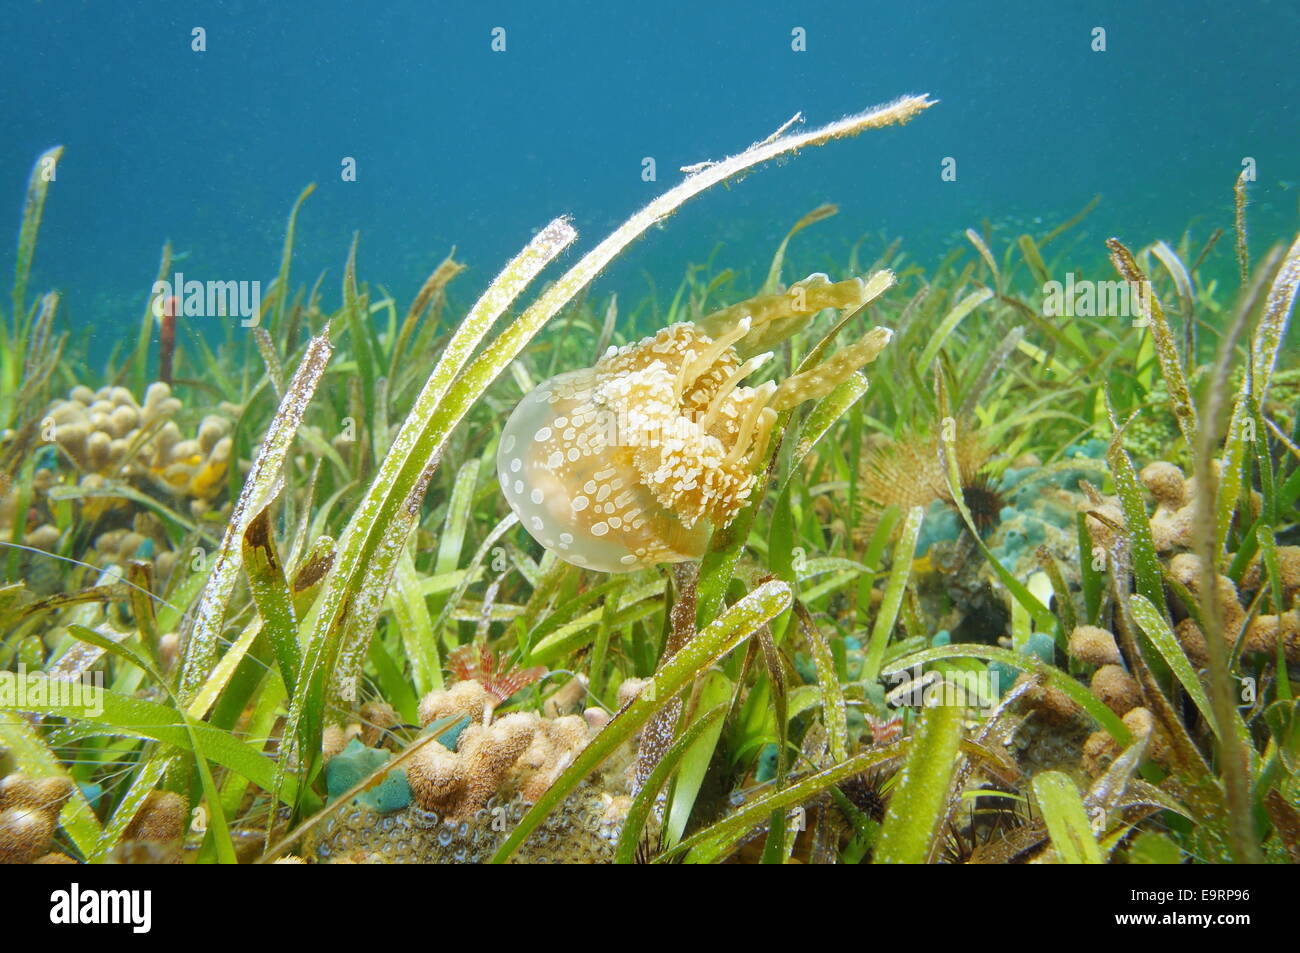 Golden medusa, Mastigias jellyfish, swims above seabed with seagrass and coral, Caribbean sea, Panama Stock Photo